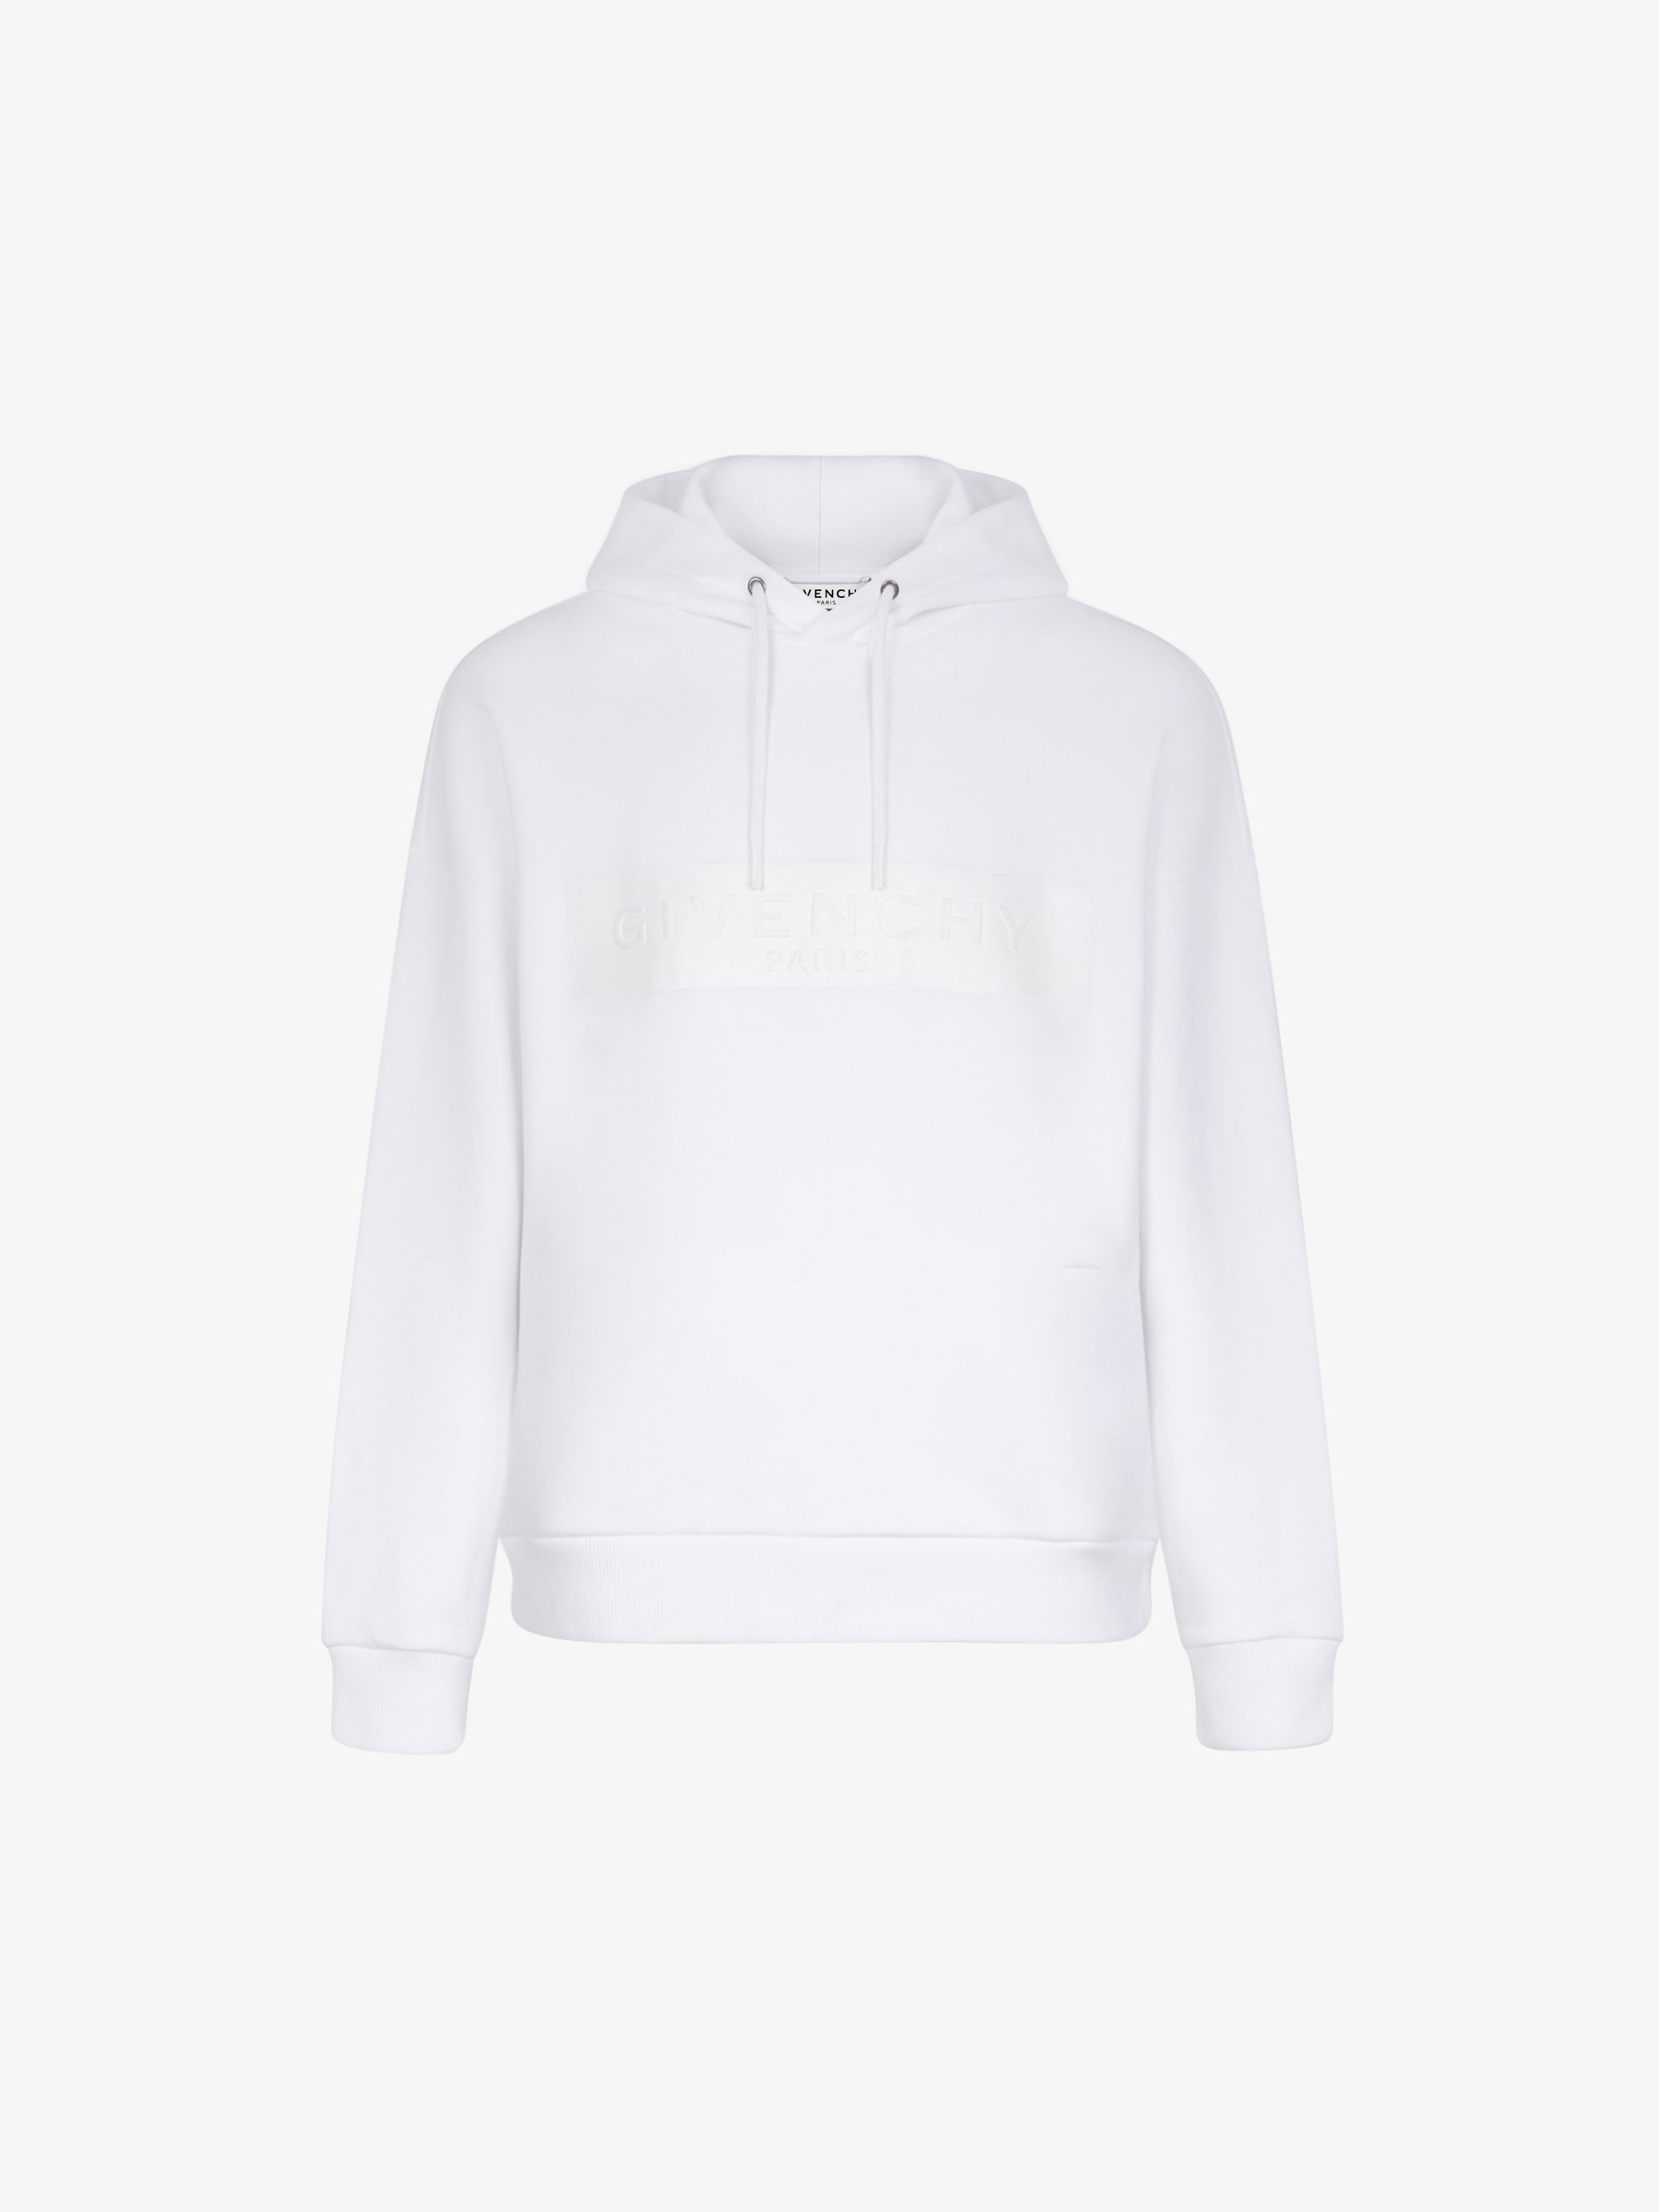 GIVENCHY hoodie with band | GIVENCHY Paris